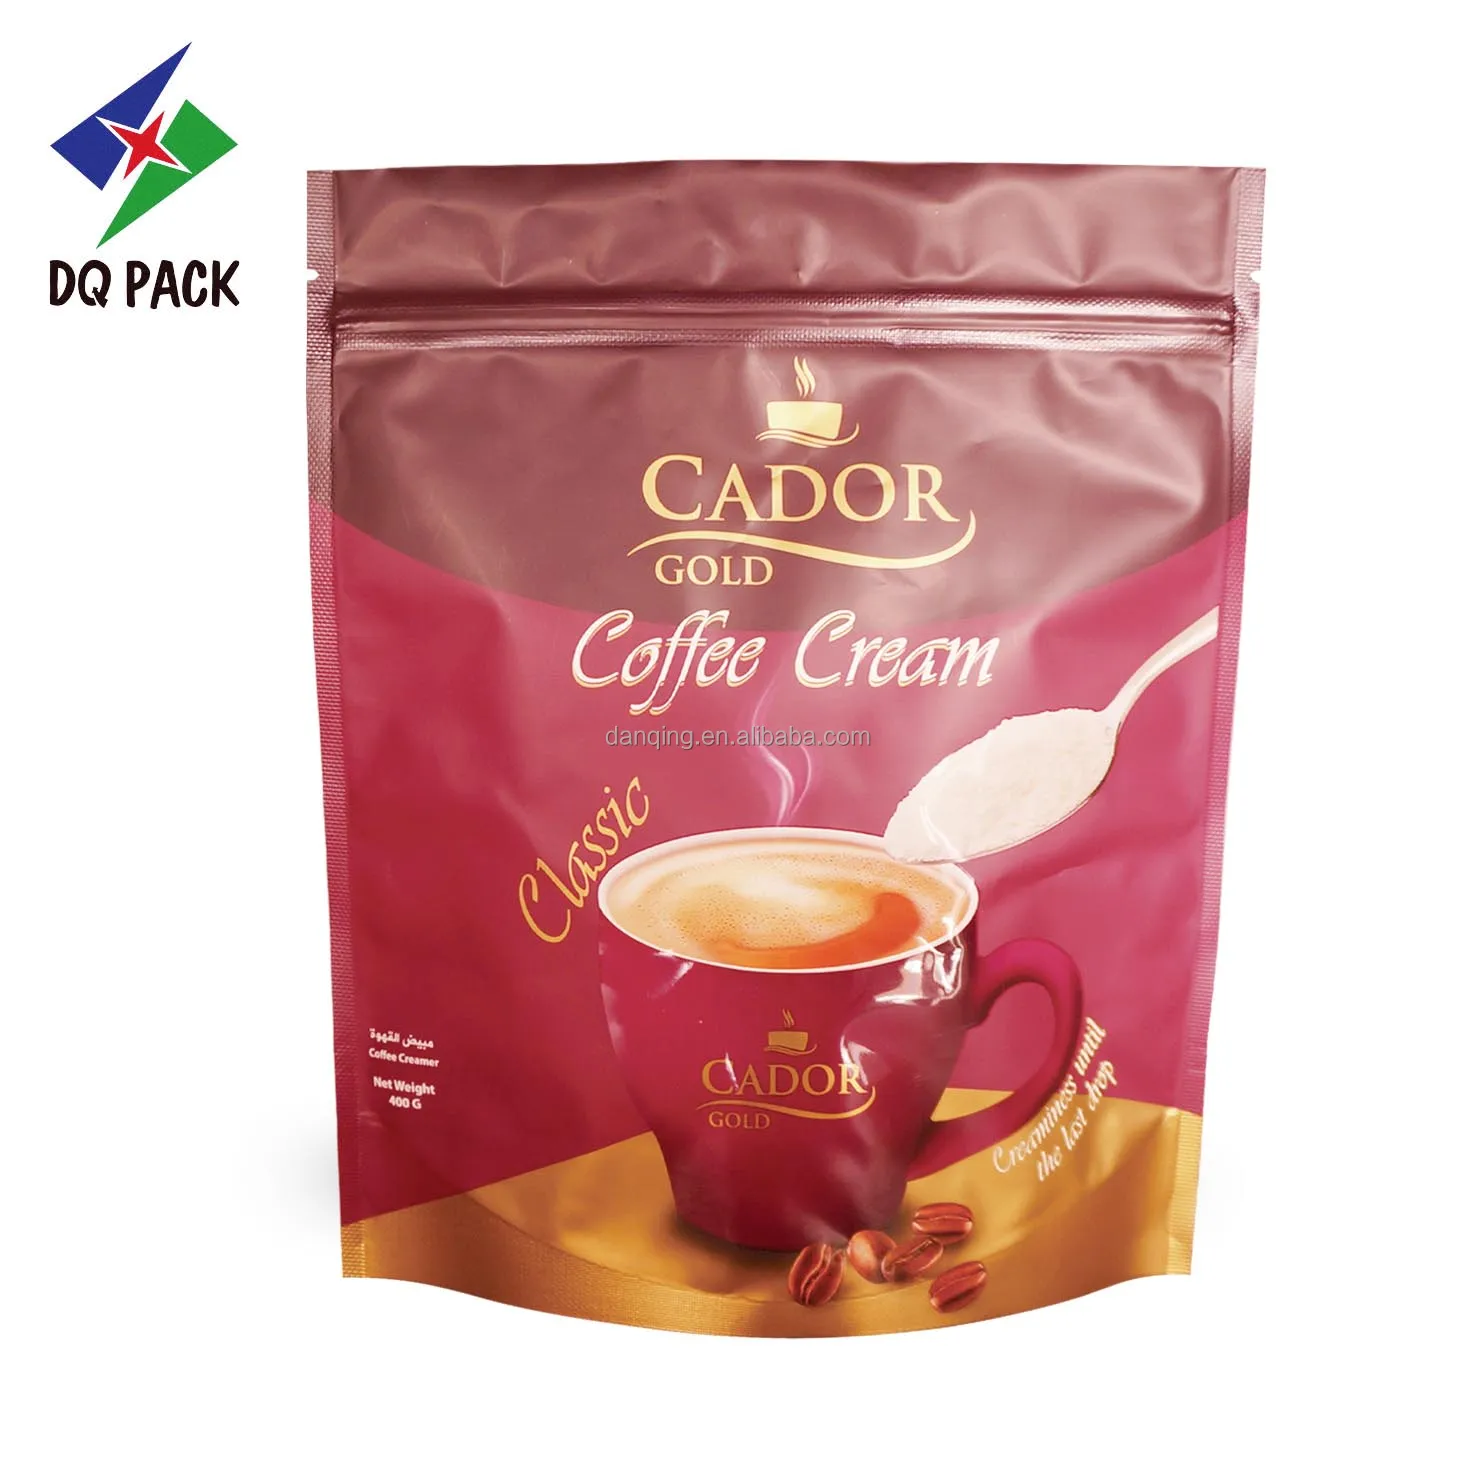 DQ PACK China Aluminum Foil Coffee Bag With Clear Window Suppliers